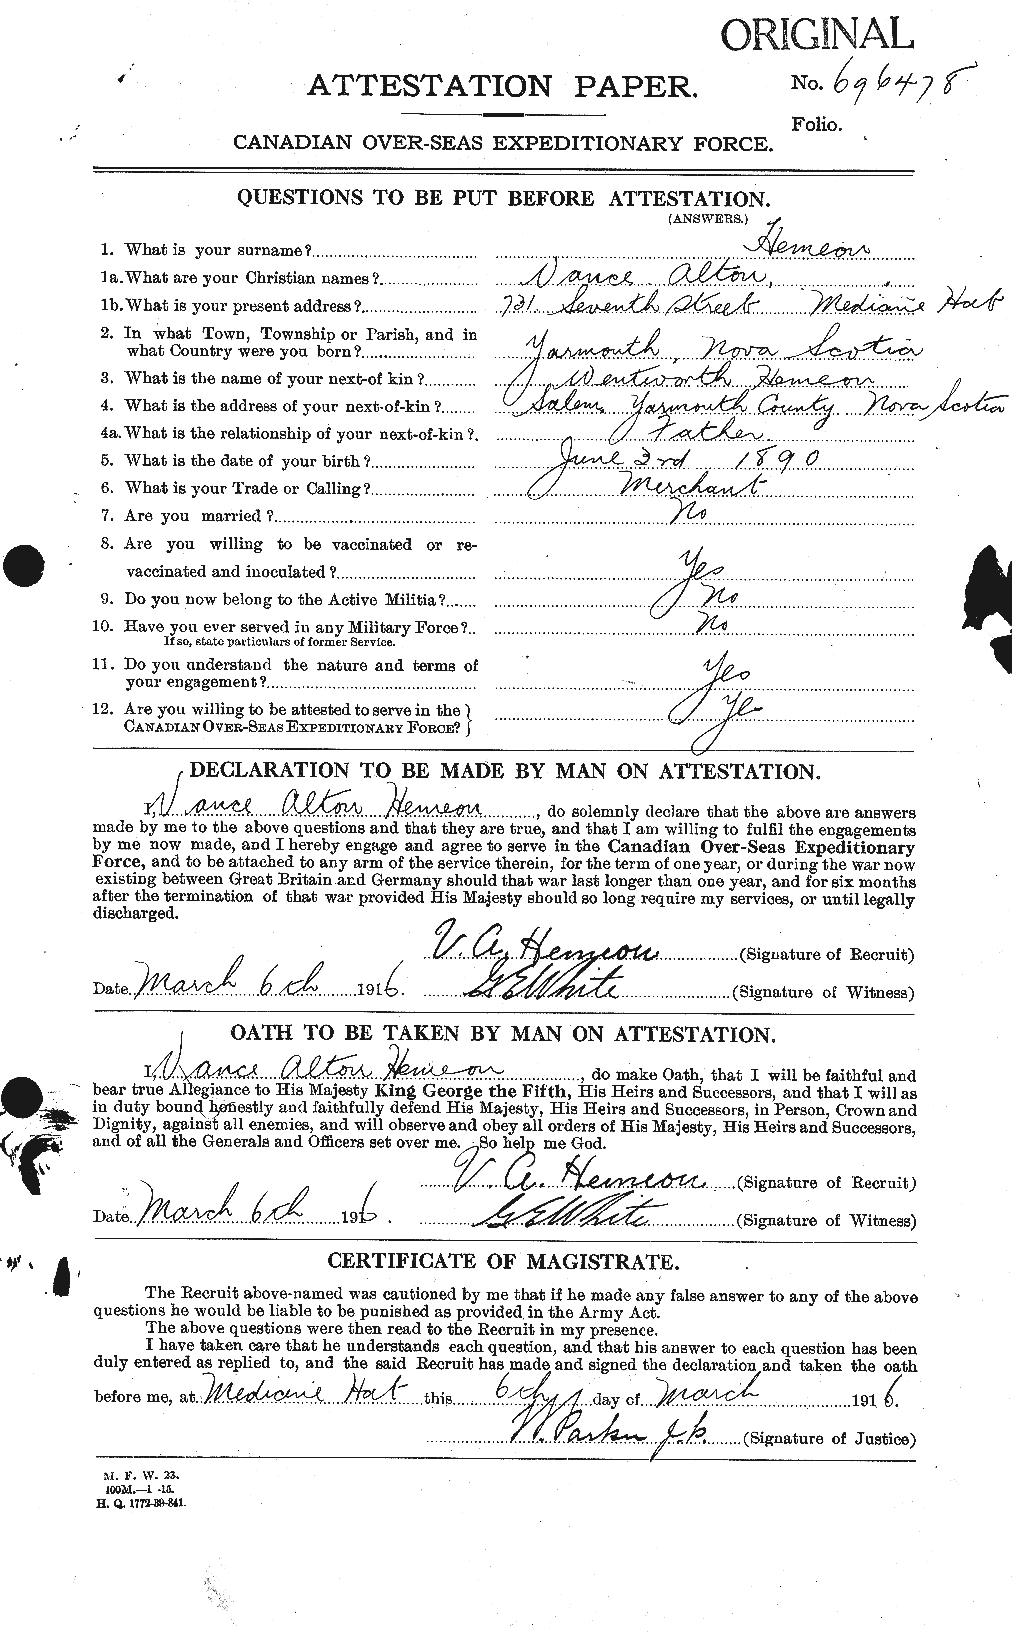 Personnel Records of the First World War - CEF 385169a